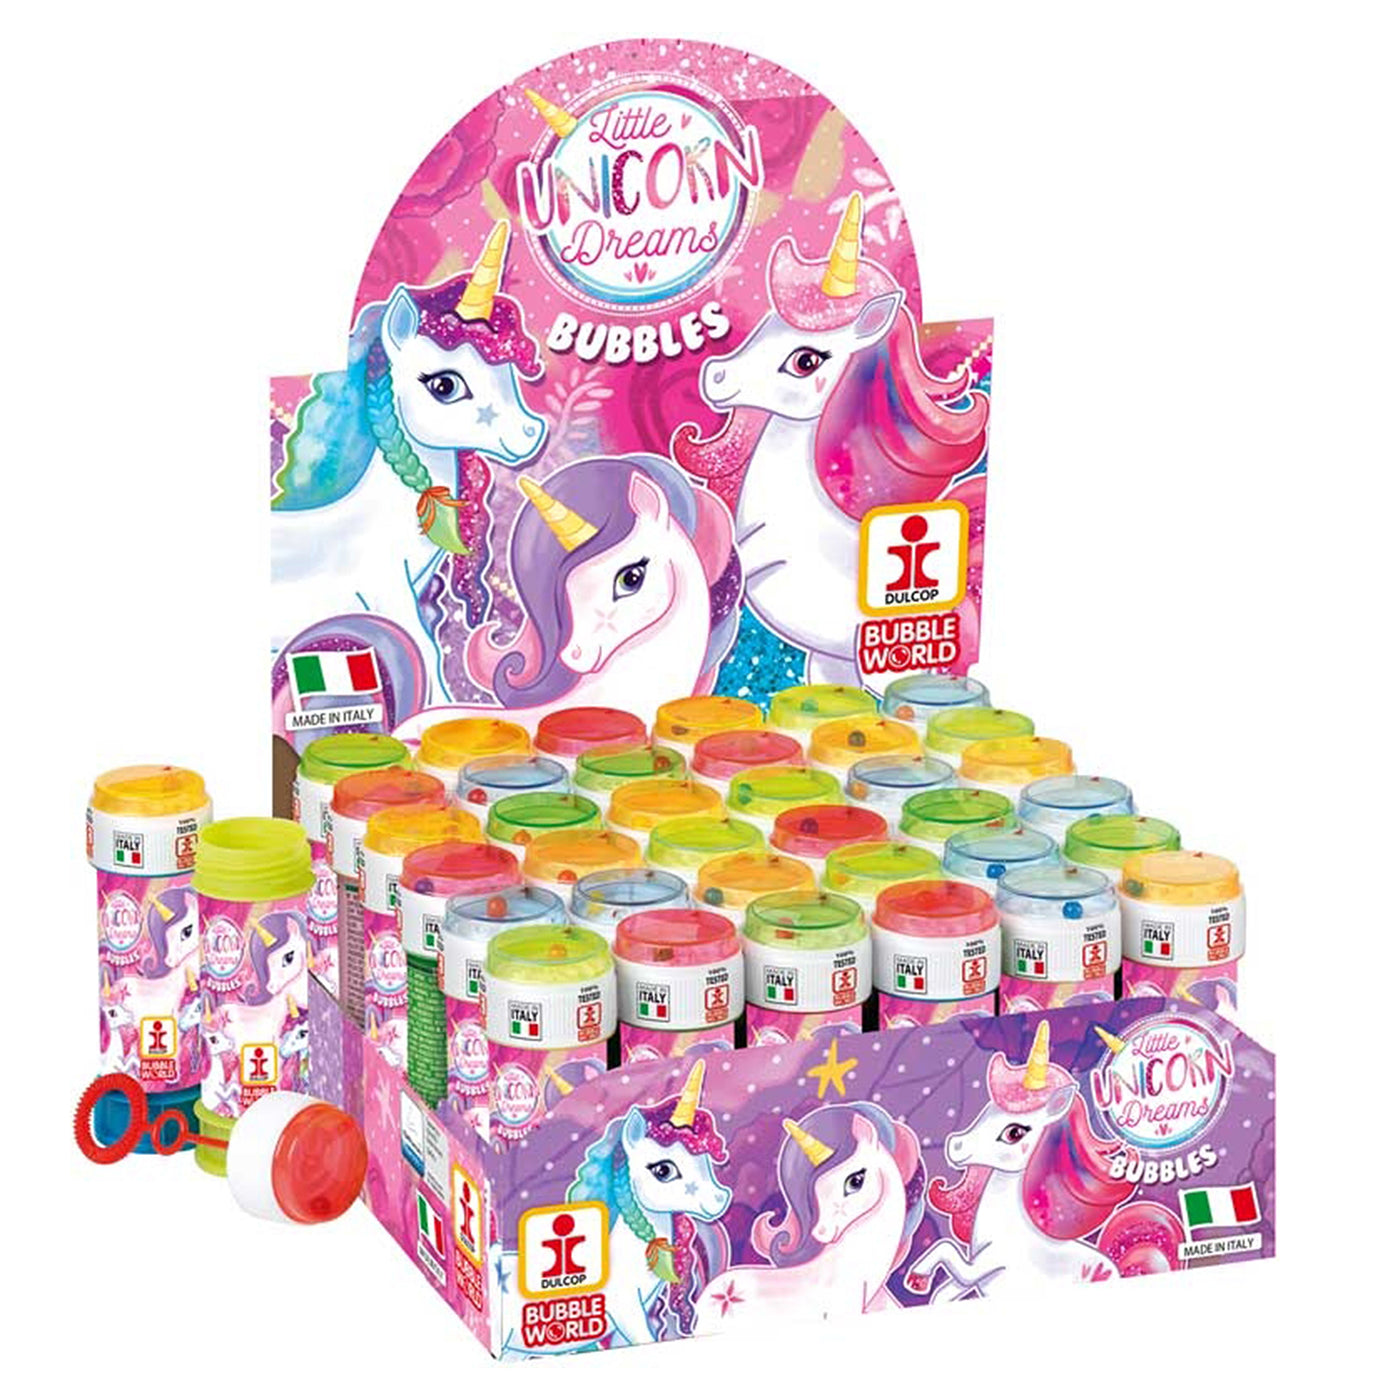 Pre Filled Rainbow Birthday Unicorn Party Goody Bags With Toys And Sweets.